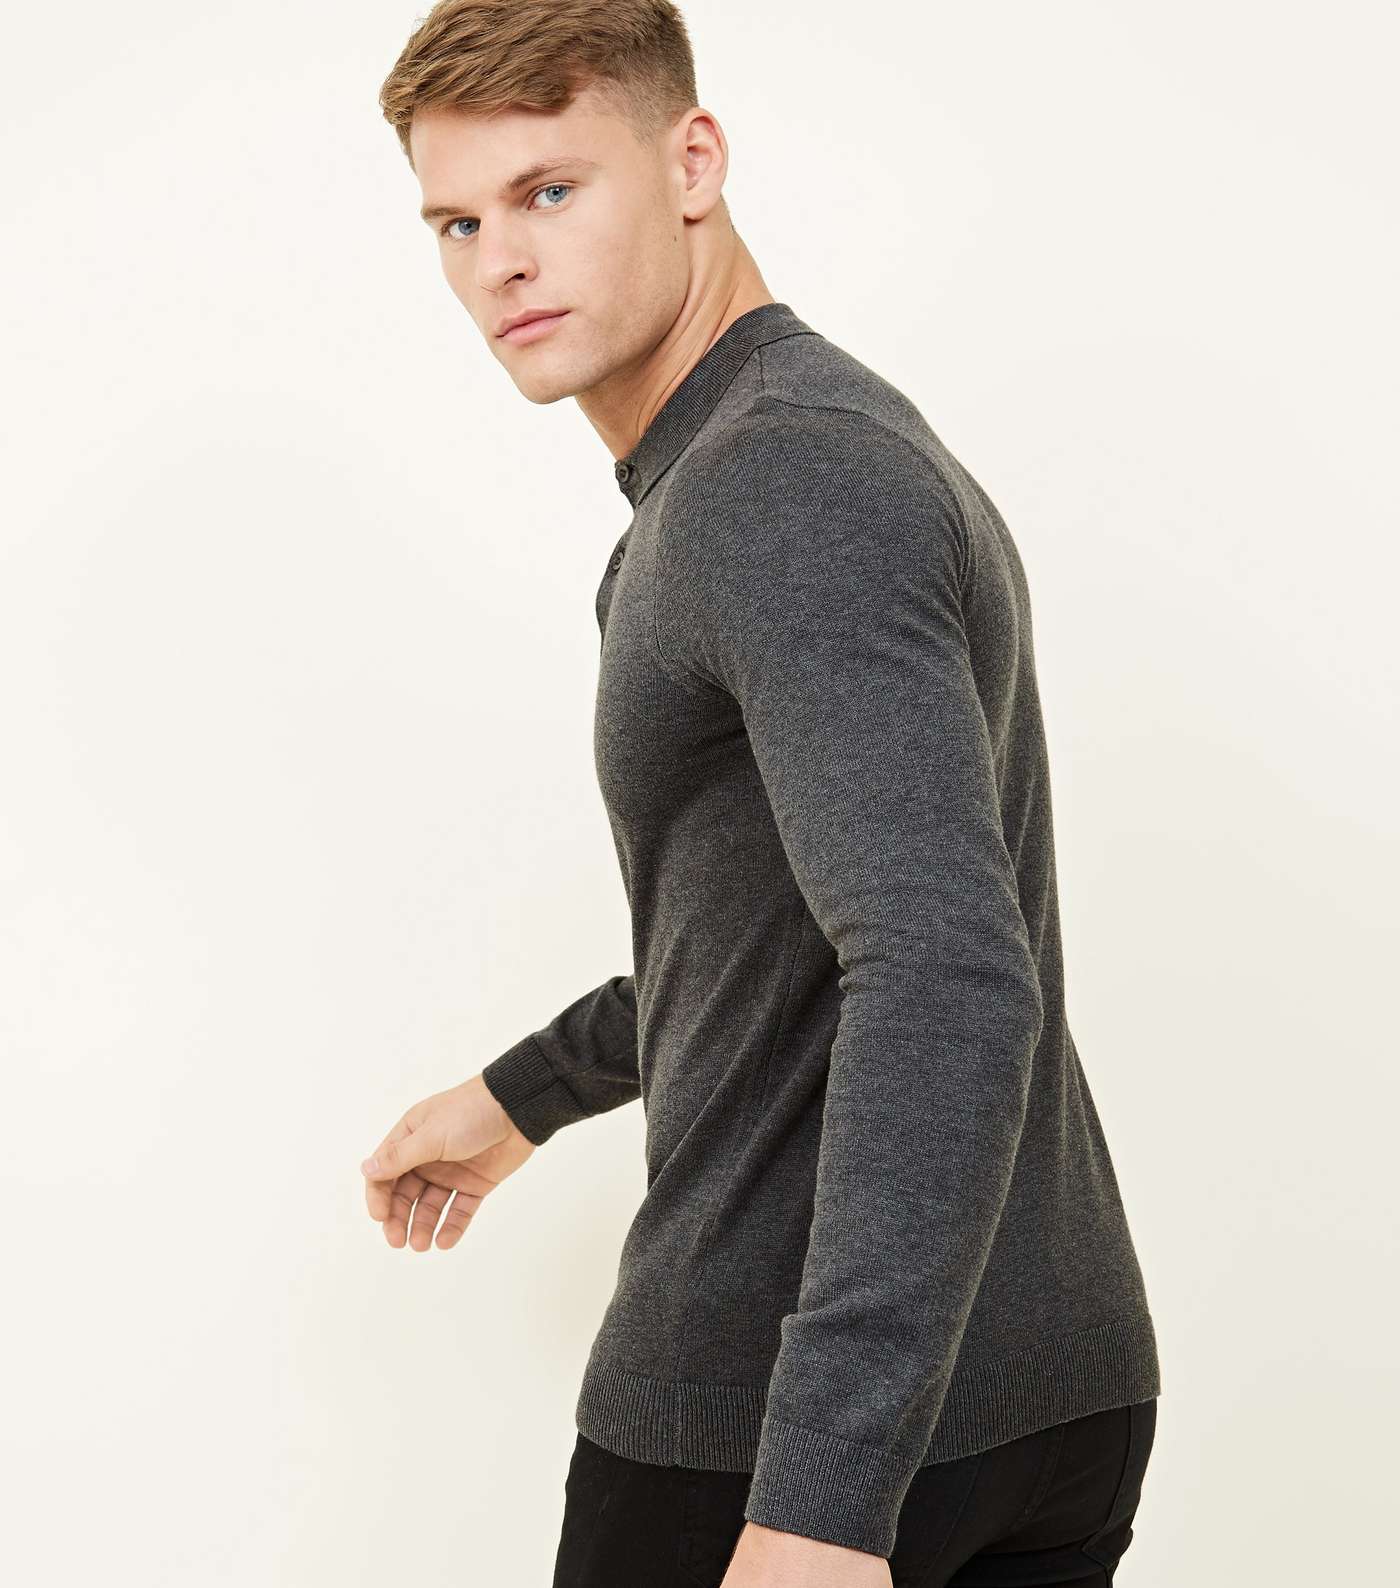 Dark Grey Long Sleeve Muscle Fit Knit Polo Shirt Image 3